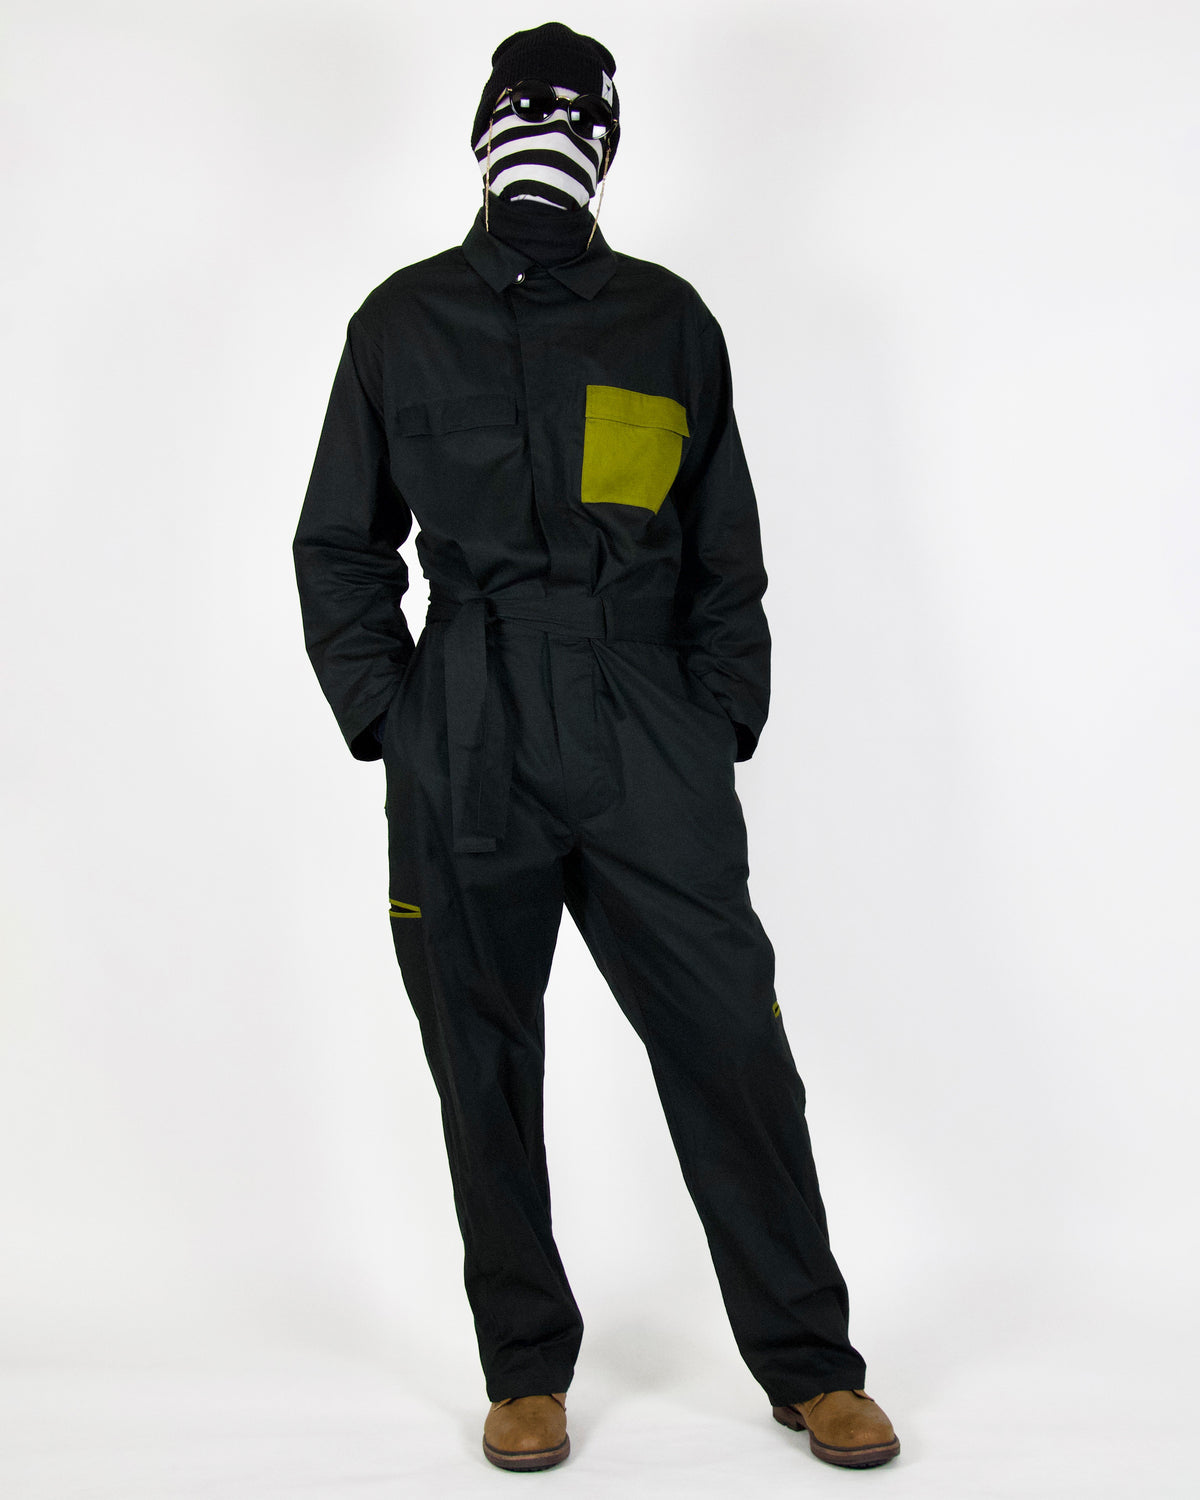 Armstrong Jumpsuit - Black